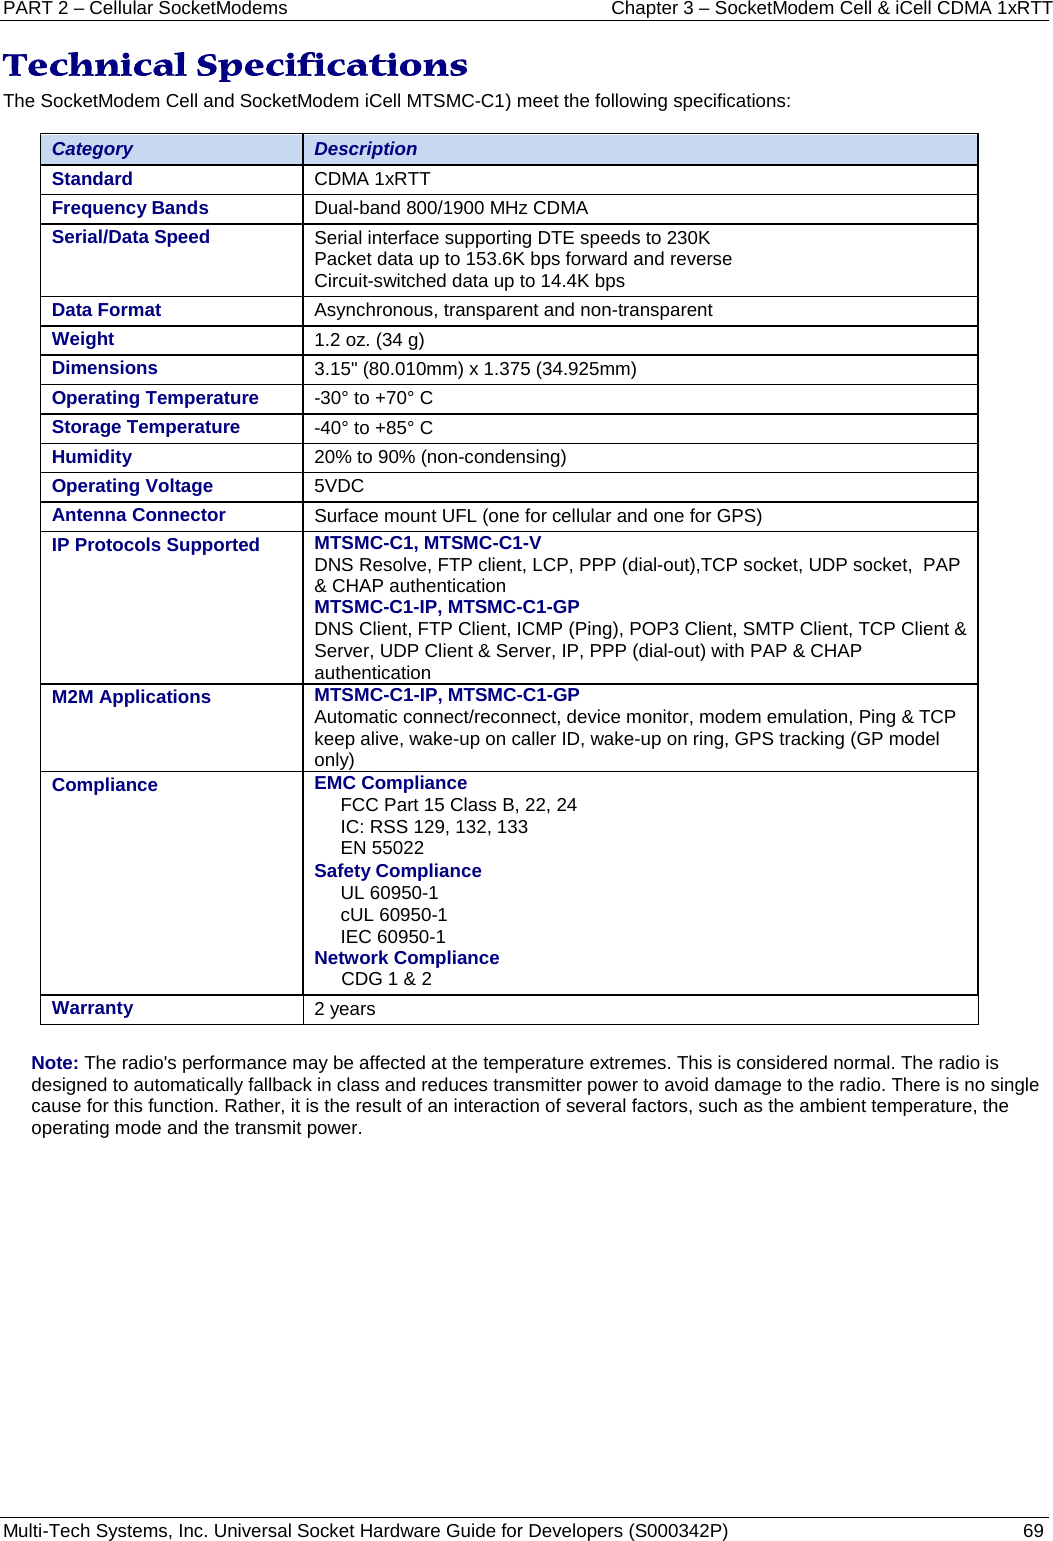 PART 2 – Cellular SocketModems Chapter 3 – SocketModem Cell &amp; iCell CDMA 1xRTT  Multi-Tech Systems, Inc. Universal Socket Hardware Guide for Developers (S000342P)  69  Technical Specifications The SocketModem Cell and SocketModem iCell MTSMC-C1) meet the following specifications:   Category Description Standard  CDMA 1xRTT Frequency Bands  Dual-band 800/1900 MHz CDMA Serial/Data Speed Serial interface supporting DTE speeds to 230K Packet data up to 153.6K bps forward and reverse Circuit-switched data up to 14.4K bps Data Format Asynchronous, transparent and non-transparent  Weight 1.2 oz. (34 g) Dimensions 3.15&quot; (80.010mm) x 1.375 (34.925mm)   Operating Temperature -30° to +70° C   Storage Temperature -40° to +85° C    Humidity 20% to 90% (non-condensing)   Operating Voltage 5VDC Antenna Connector Surface mount UFL (one for cellular and one for GPS) IP Protocols Supported MTSMC-C1, MTSMC-C1-V DNS Resolve, FTP client, LCP, PPP (dial-out),TCP socket, UDP socket,  PAP &amp; CHAP authentication MTSMC-C1-IP, MTSMC-C1-GP DNS Client, FTP Client, ICMP (Ping), POP3 Client, SMTP Client, TCP Client &amp; Server, UDP Client &amp; Server, IP, PPP (dial-out) with PAP &amp; CHAP authentication M2M Applications MTSMC-C1-IP, MTSMC-C1-GP Automatic connect/reconnect, device monitor, modem emulation, Ping &amp; TCP keep alive, wake-up on caller ID, wake-up on ring, GPS tracking (GP model only) Compliance EMC Compliance FCC Part 15 Class B, 22, 24 IC: RSS 129, 132, 133 EN 55022  Safety Compliance UL 60950-1 cUL 60950-1 IEC 60950-1 Network Compliance CDG 1 &amp; 2 Warranty 2 years   Note: The radio&apos;s performance may be affected at the temperature extremes. This is considered normal. The radio is designed to automatically fallback in class and reduces transmitter power to avoid damage to the radio. There is no single cause for this function. Rather, it is the result of an interaction of several factors, such as the ambient temperature, the operating mode and the transmit power.    